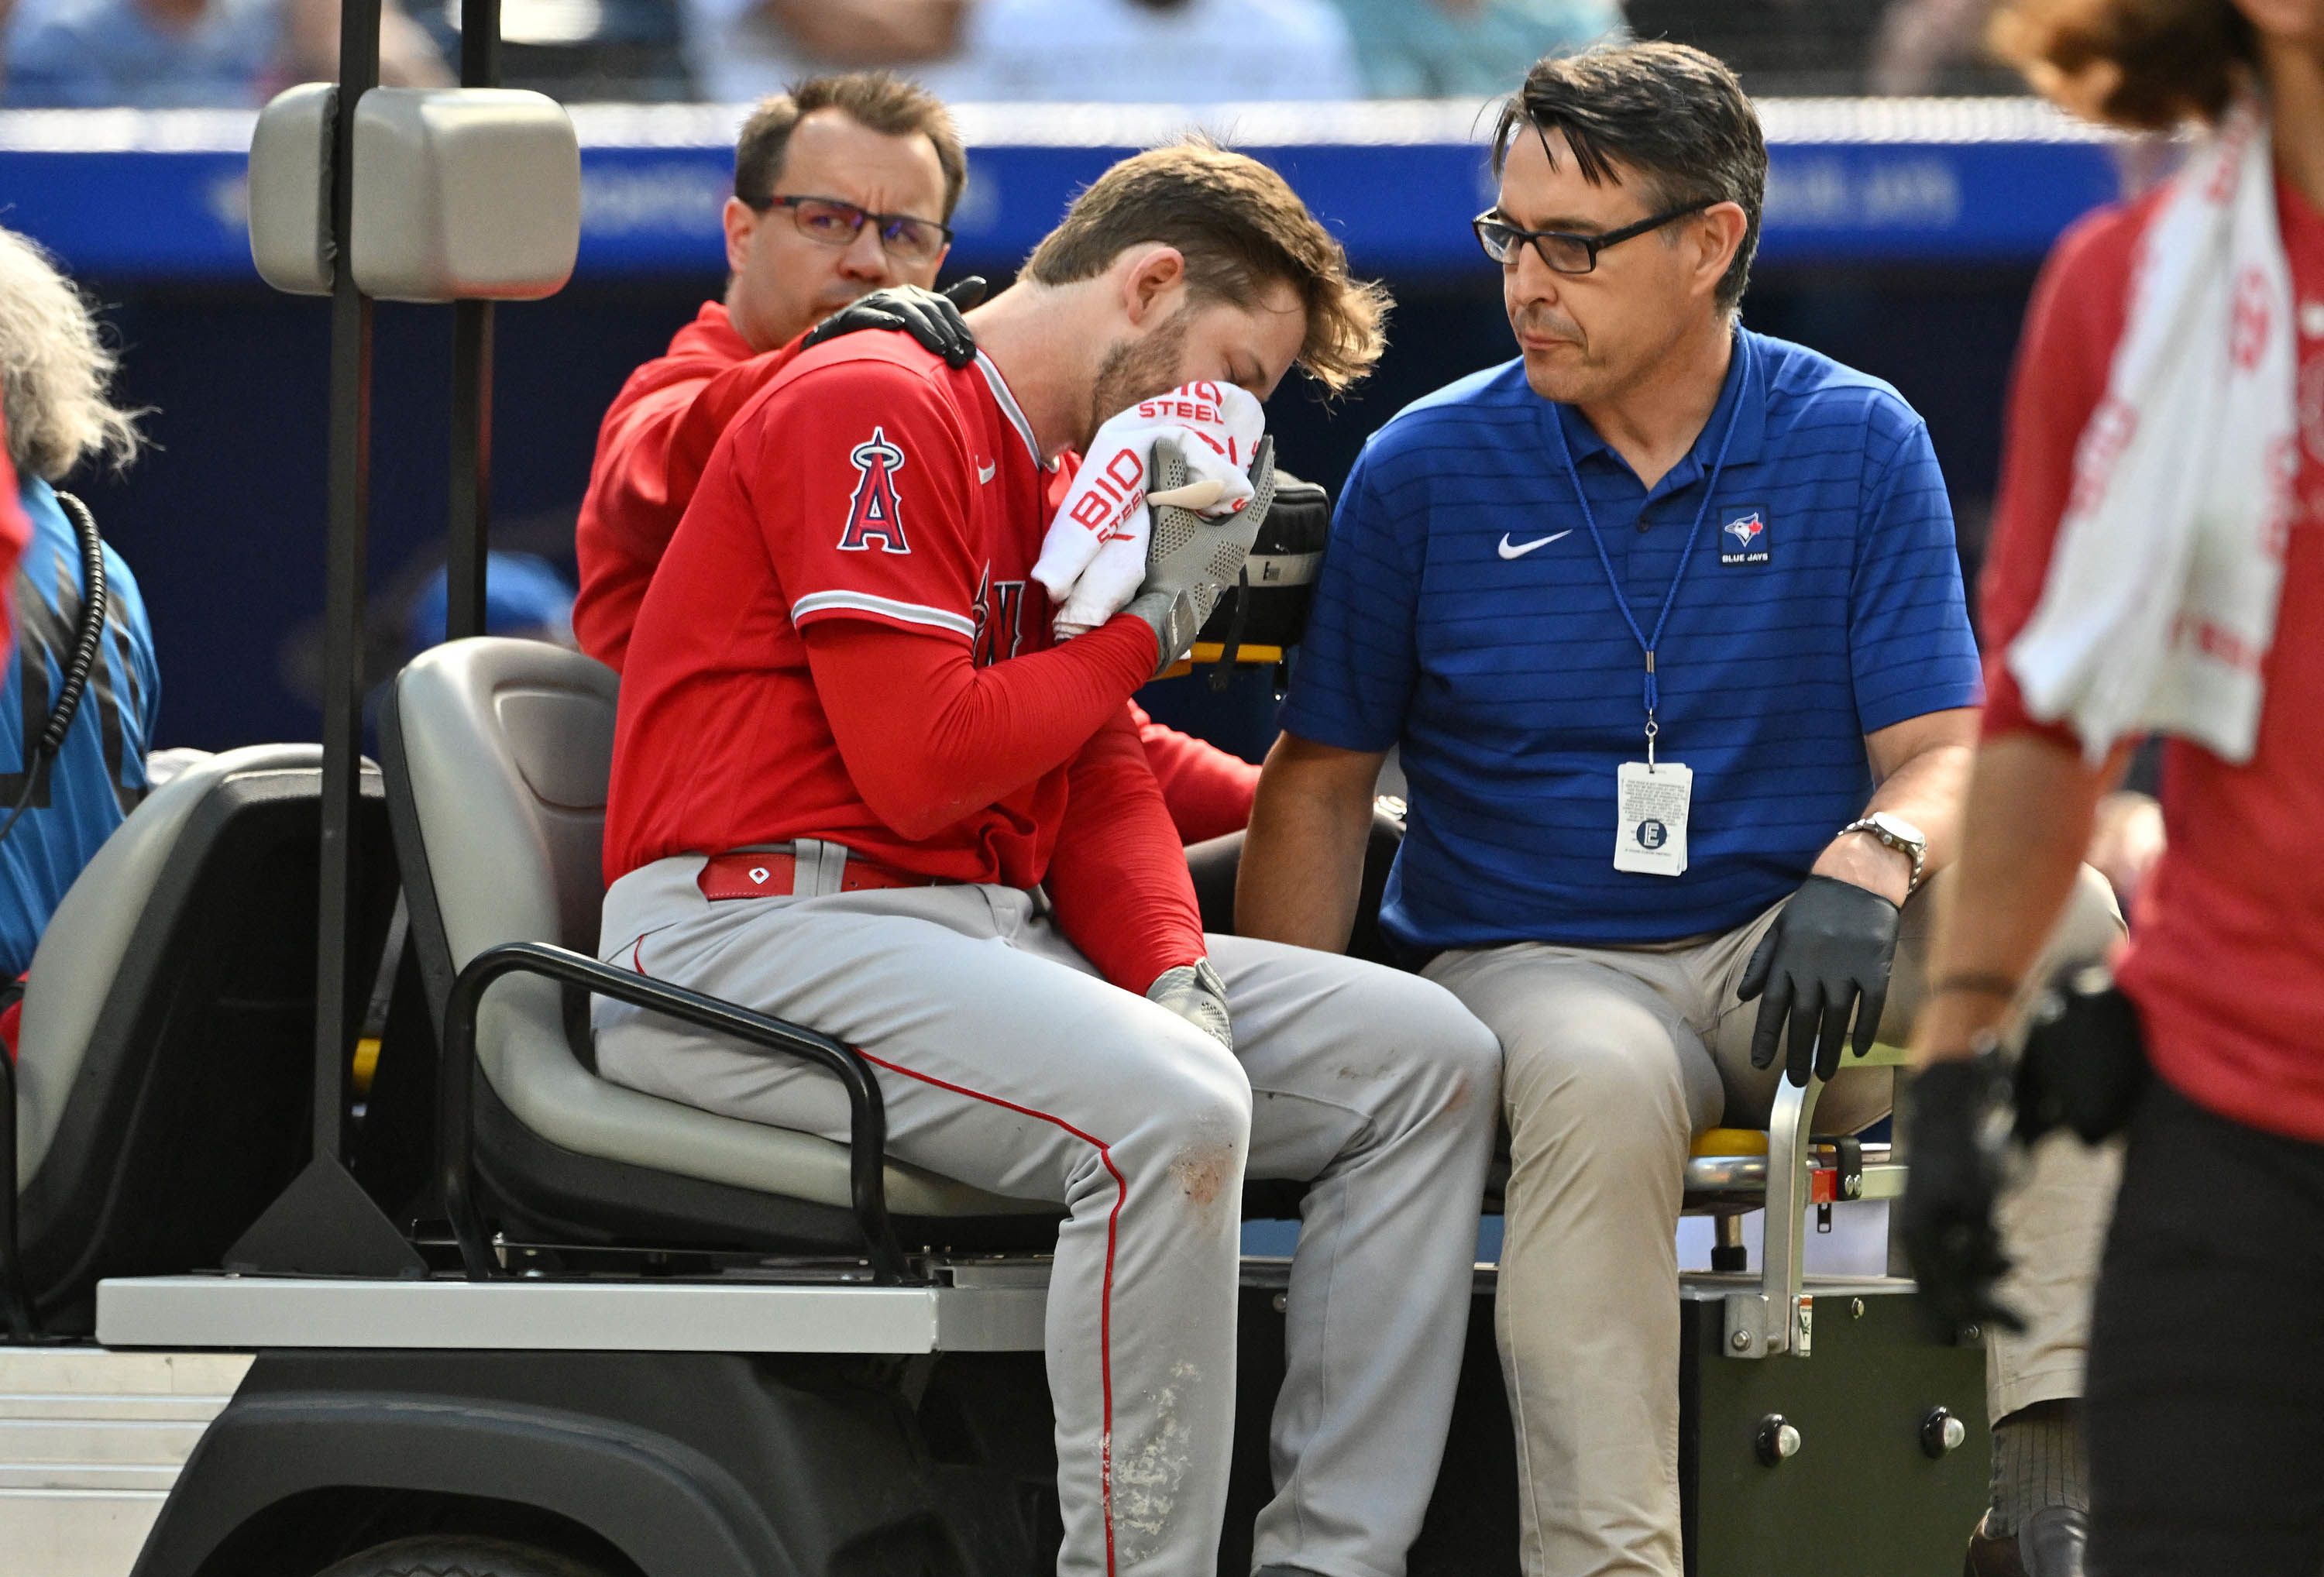 Angels' Taylor Ward Carted Off After Taking Pitch To Face